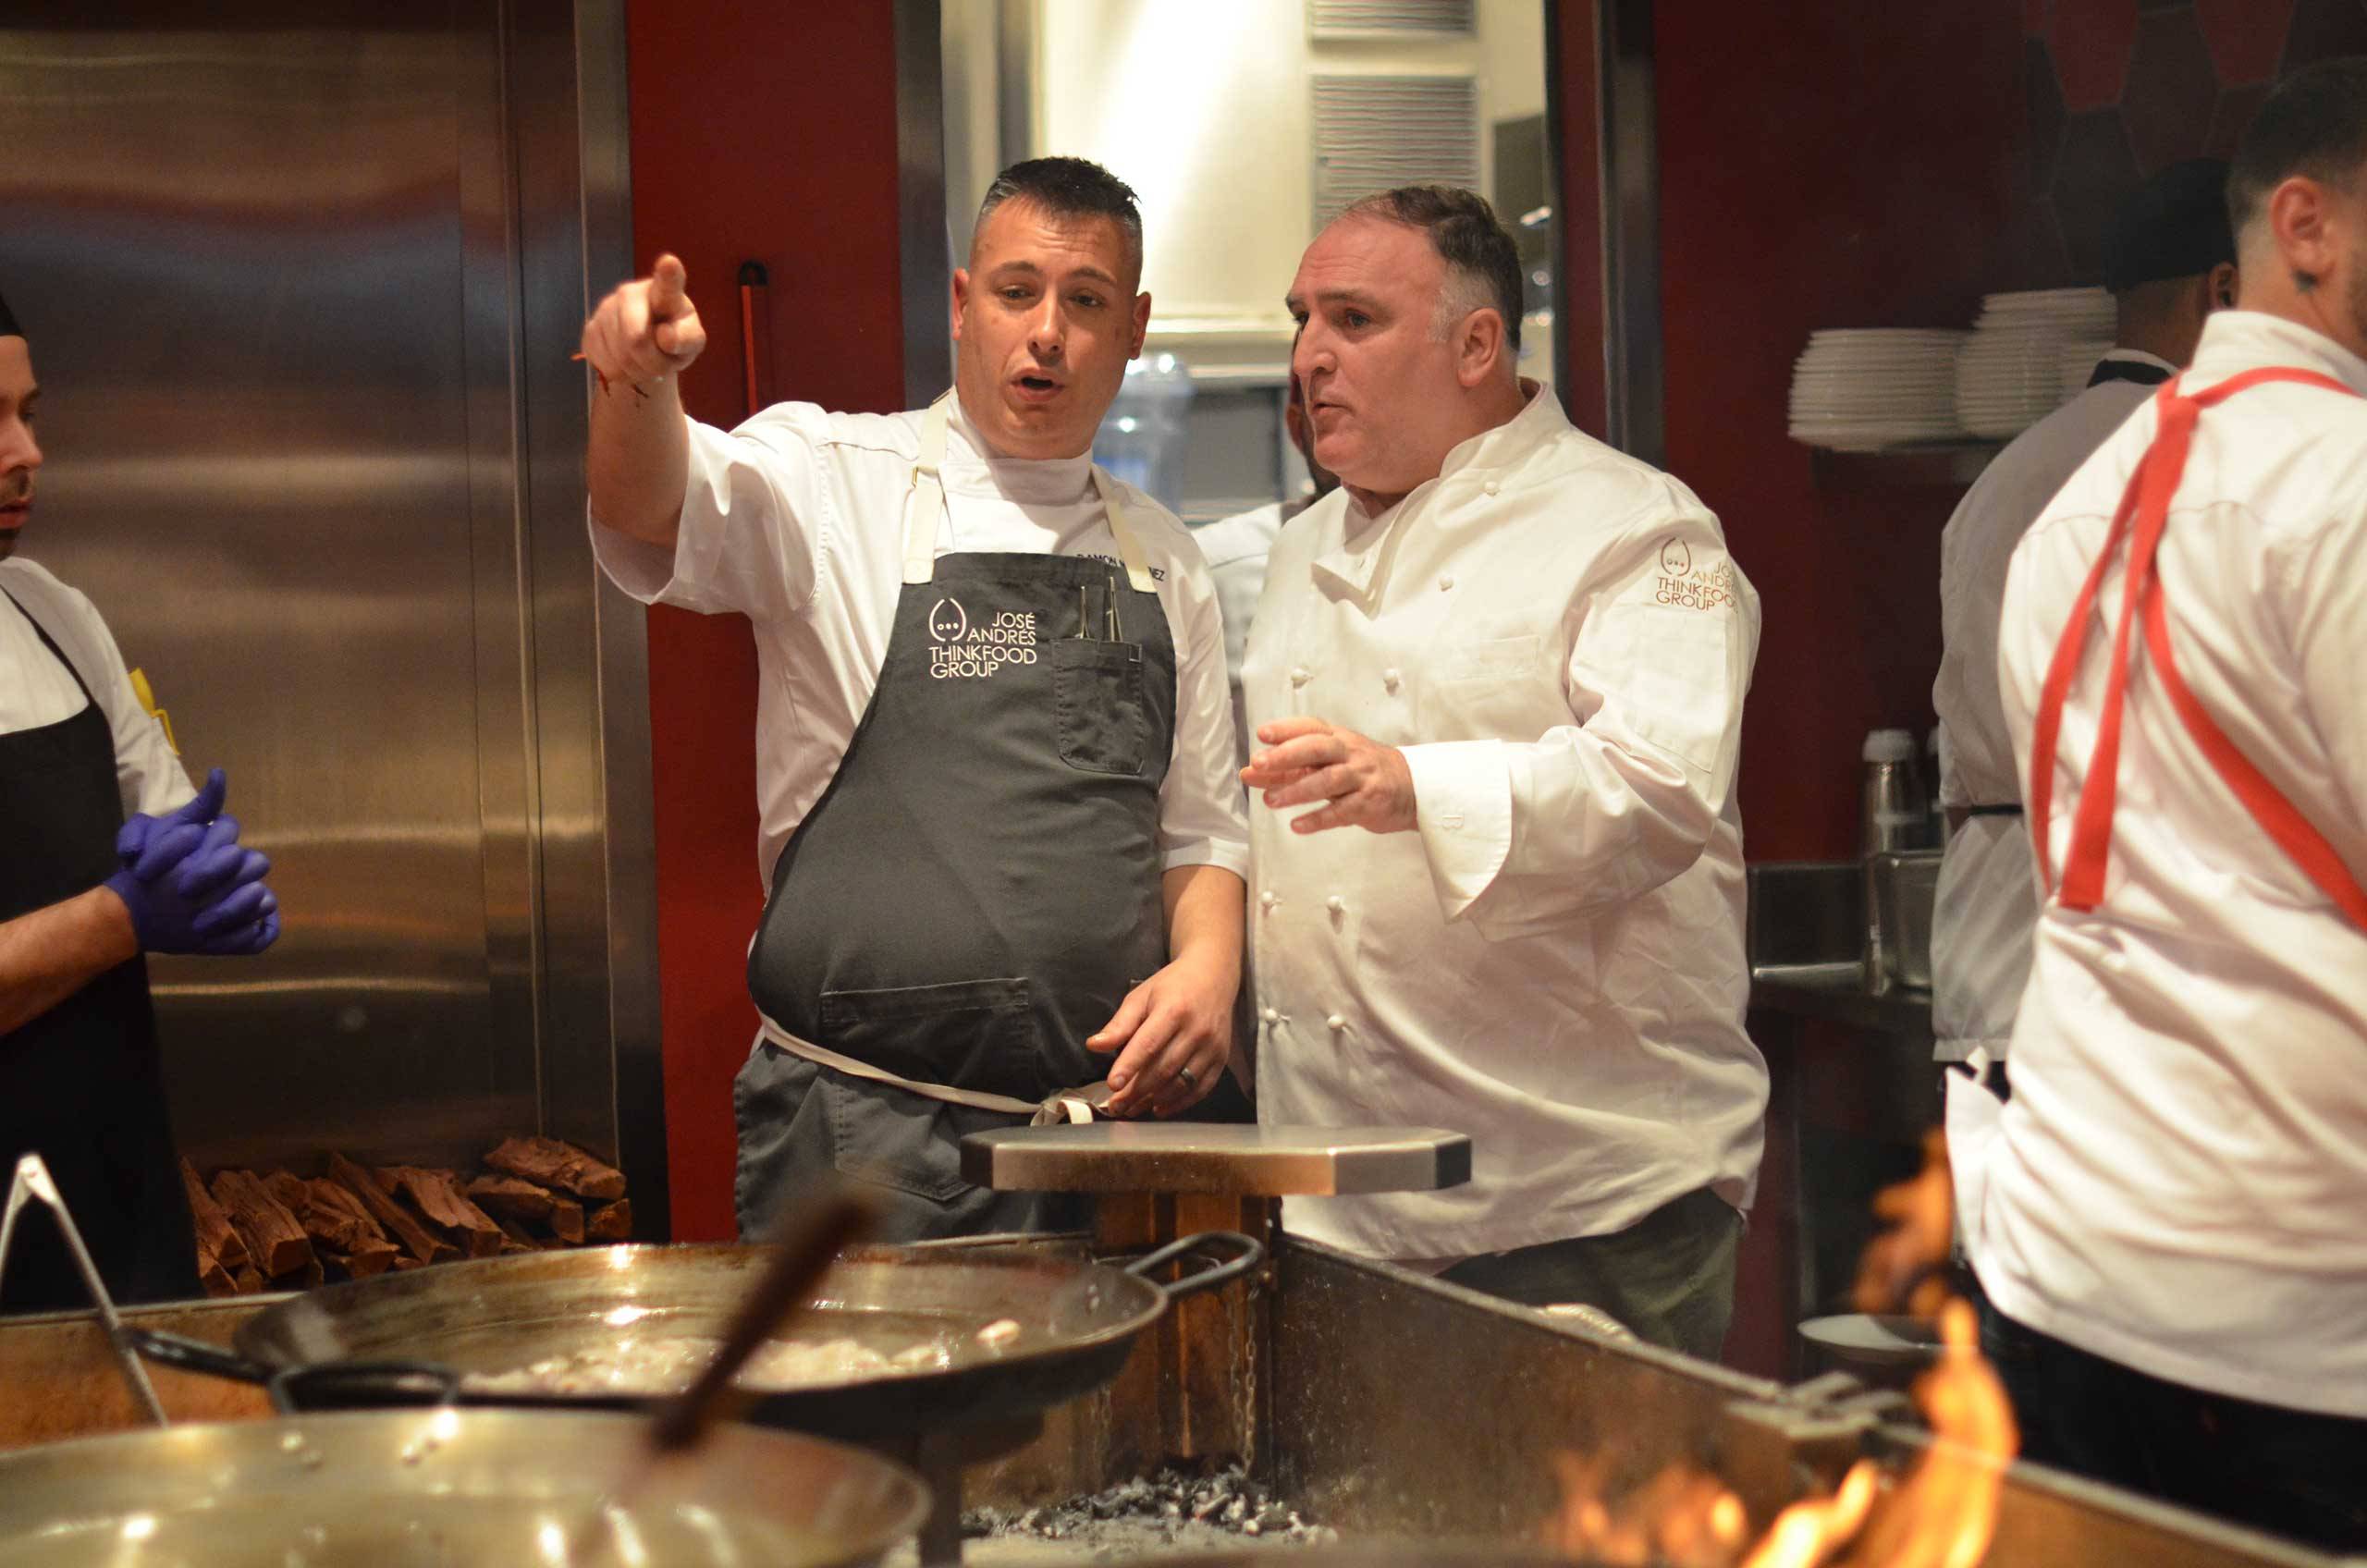 VIDEO - World Renowned Chef José Andrés officially opens Jaleo at Disney Springs